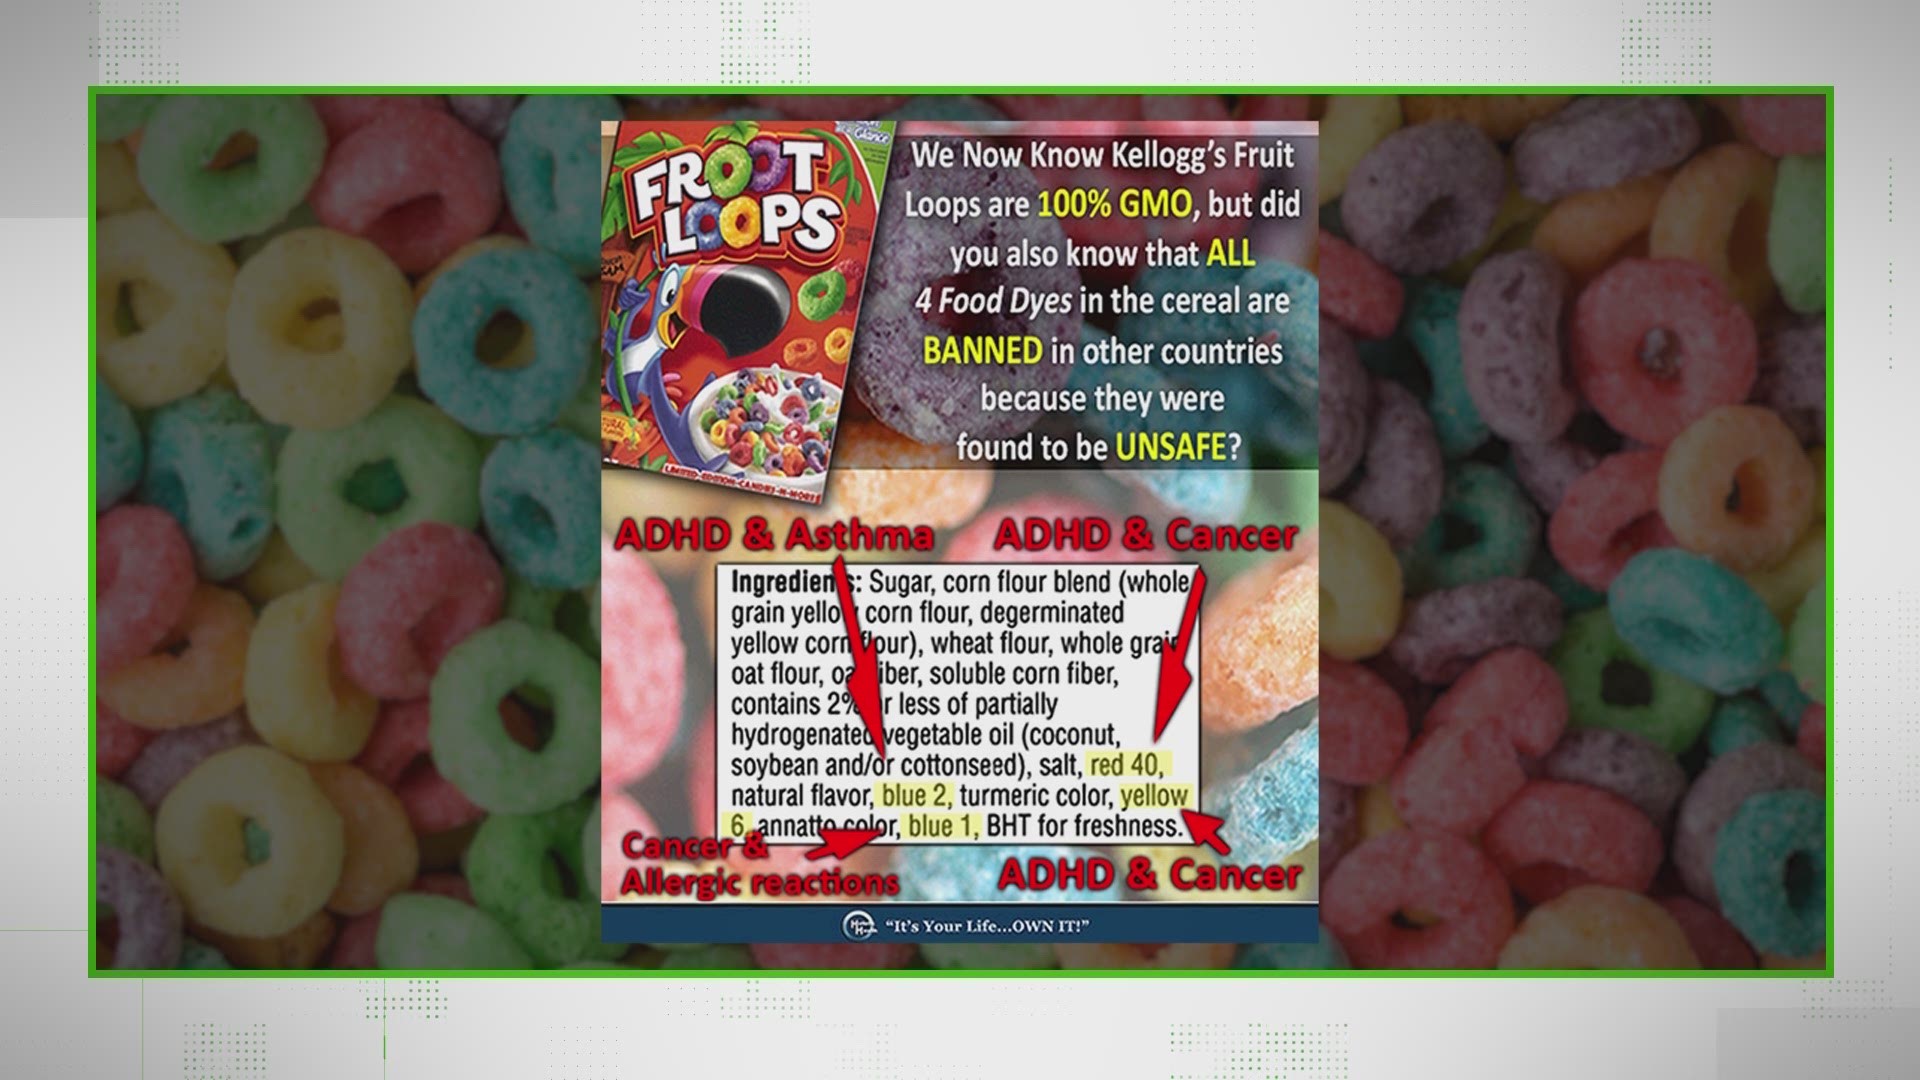 Unicorn Froot Loops Are Here and I Can't Take It Anymore